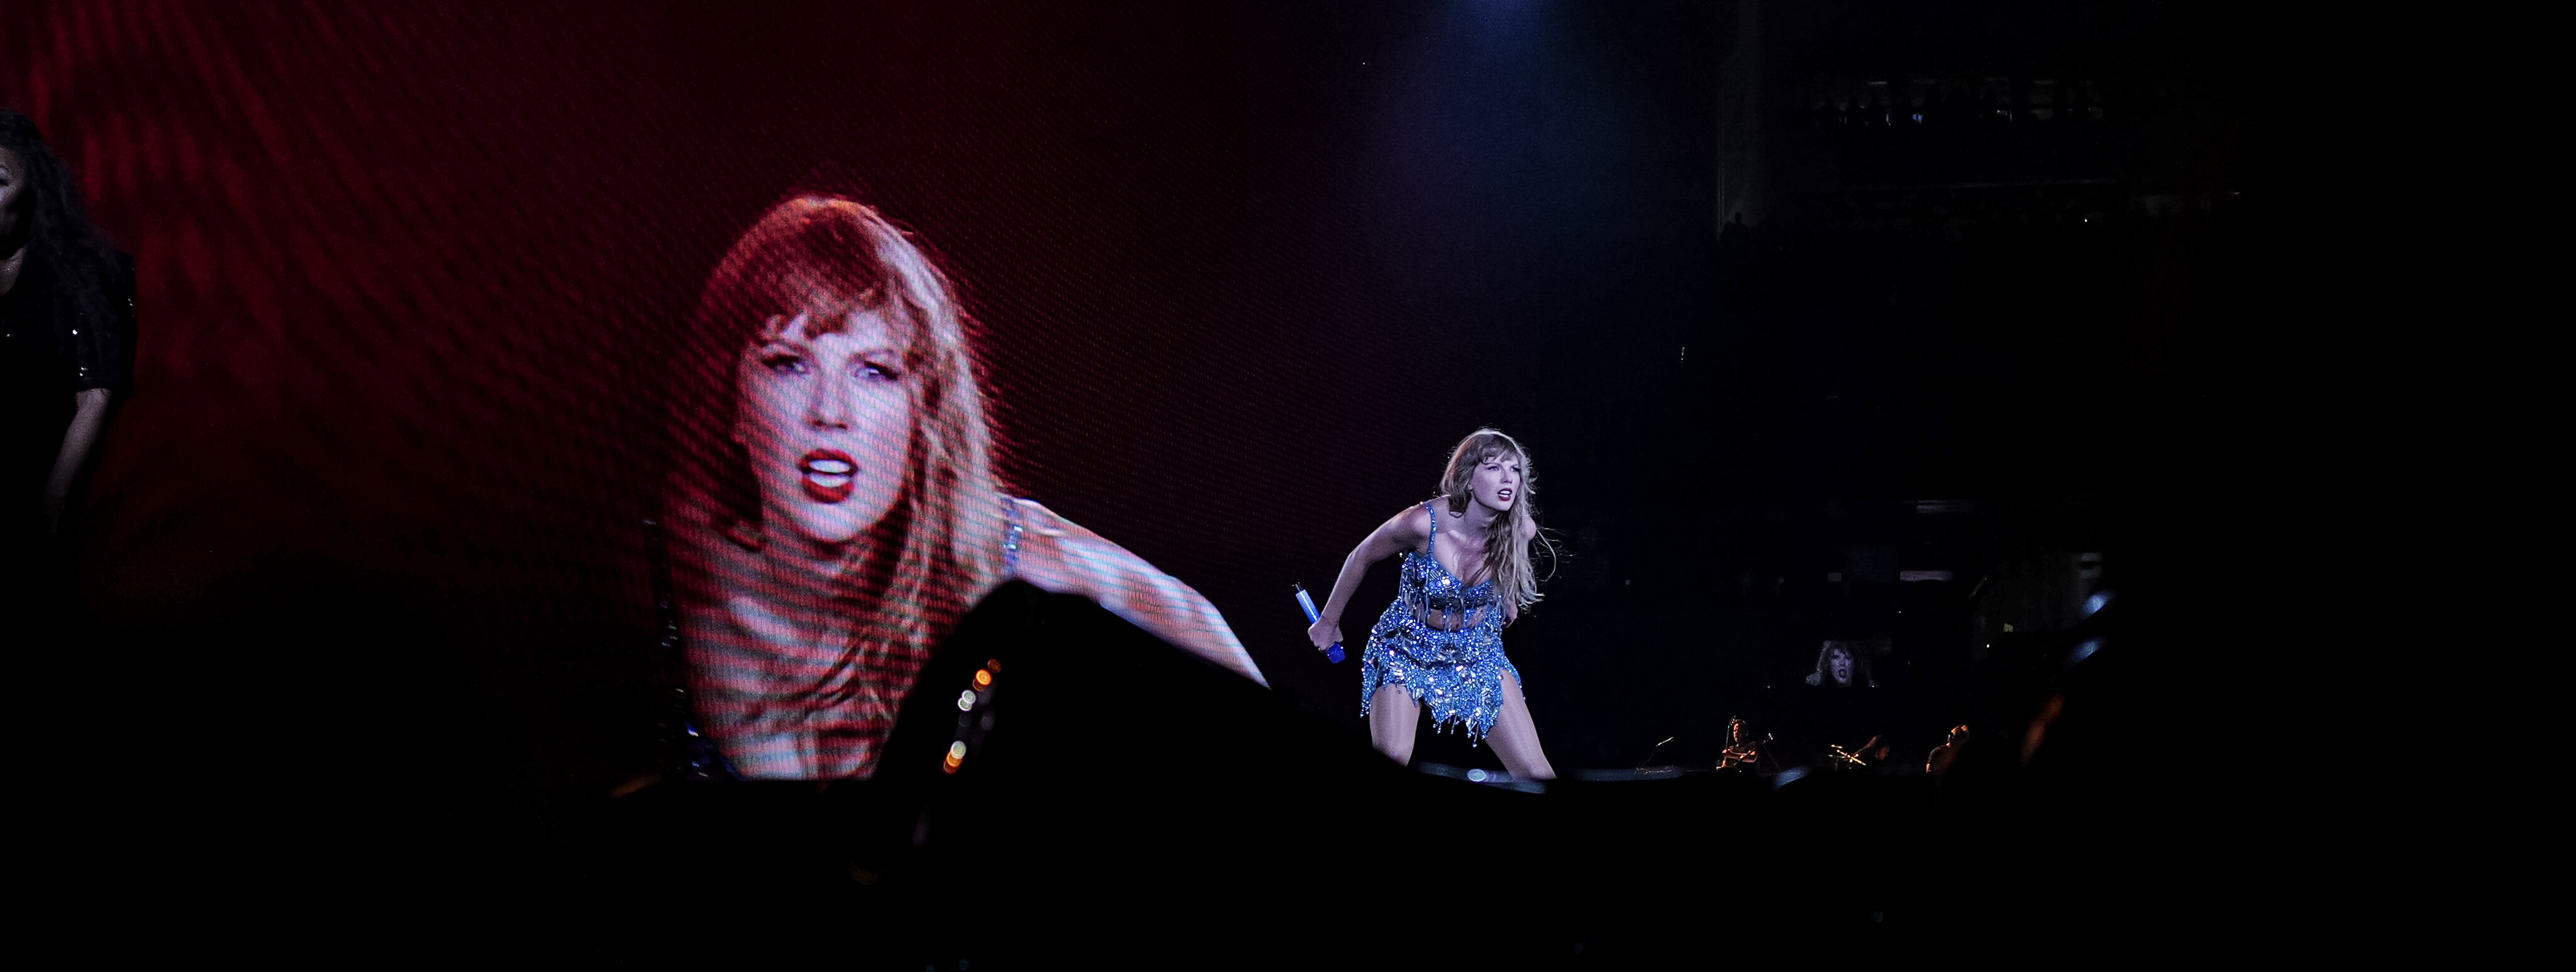 Taylor Swift on stage - Paolo V, CC BY 2.0 <https://creativecommons.org/licenses/by/2.0>, via Wikimedia Commons